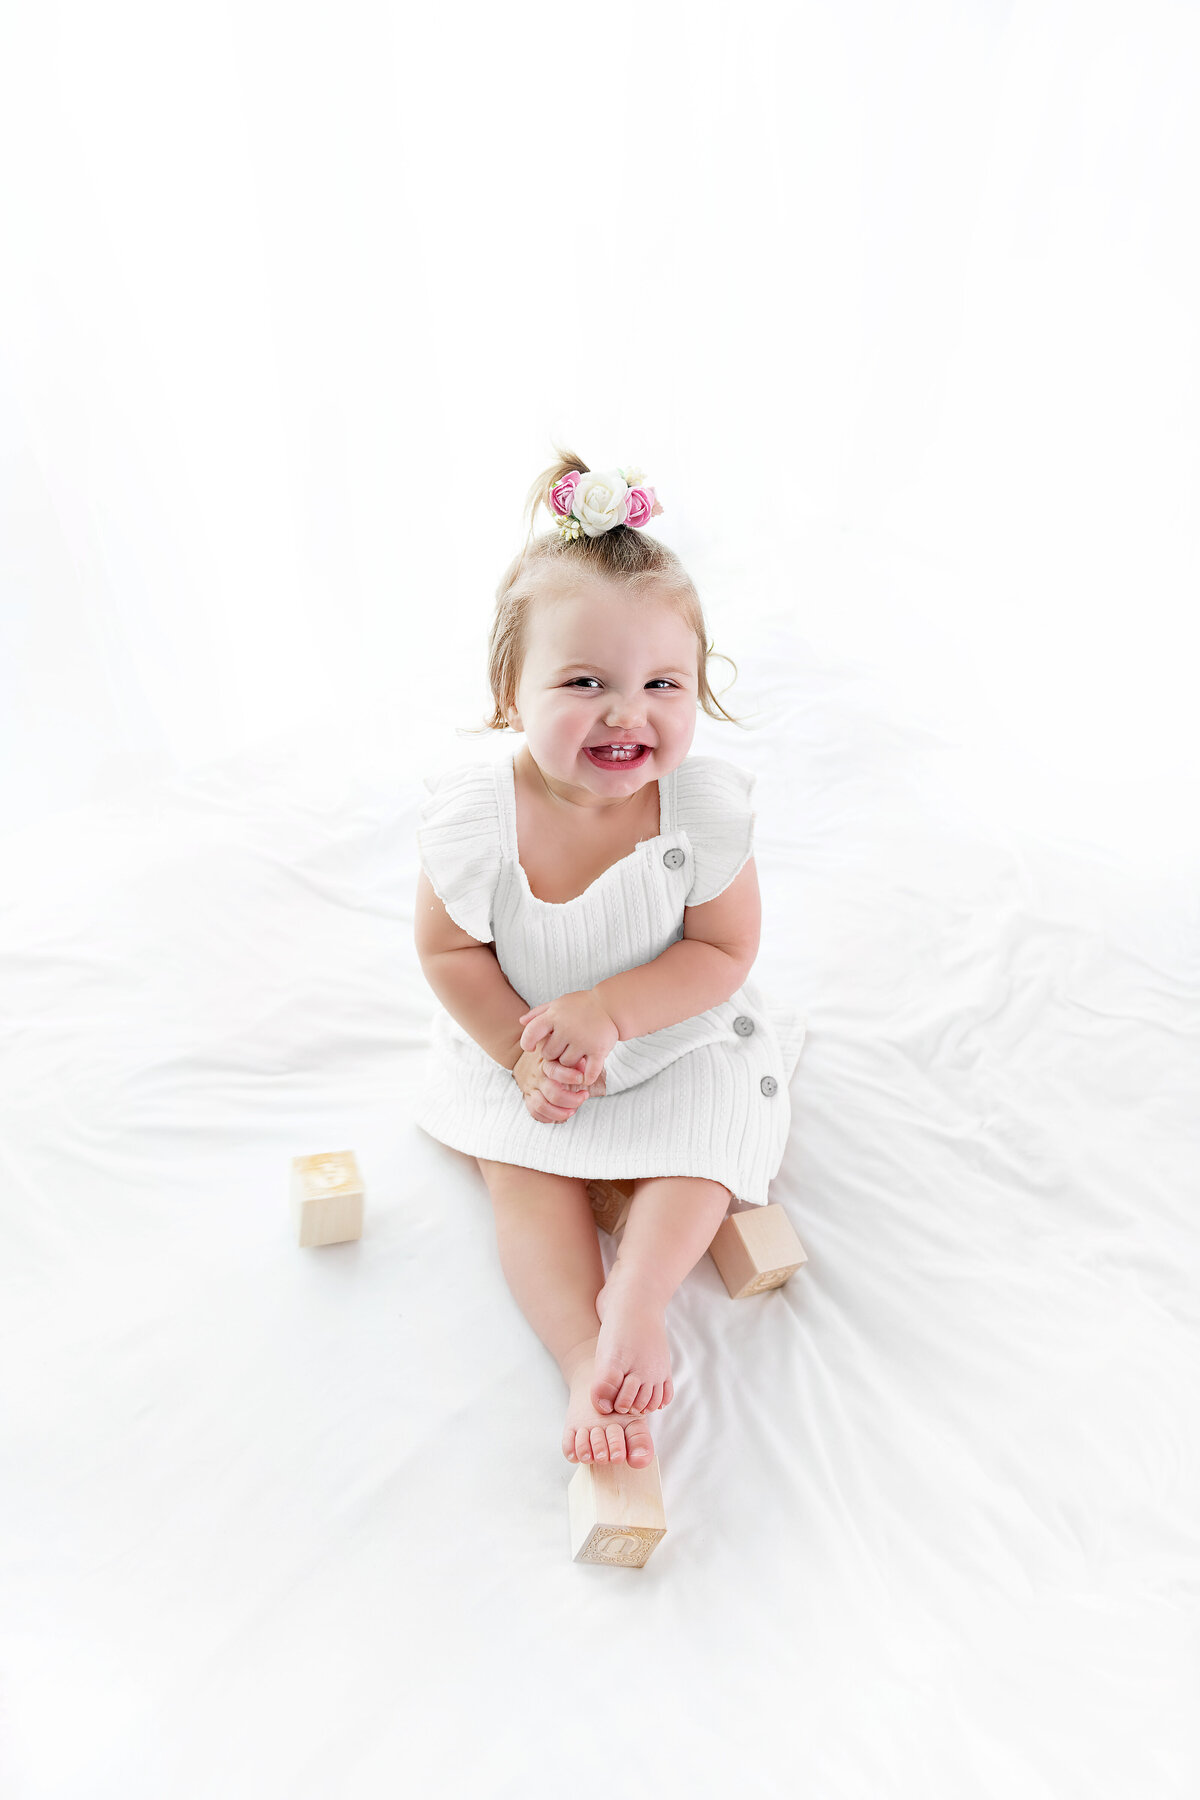 A toddler girl sits on a bed in a white dress smiling and playing with wooden blocks as posed by a childrens photographer Atlanta